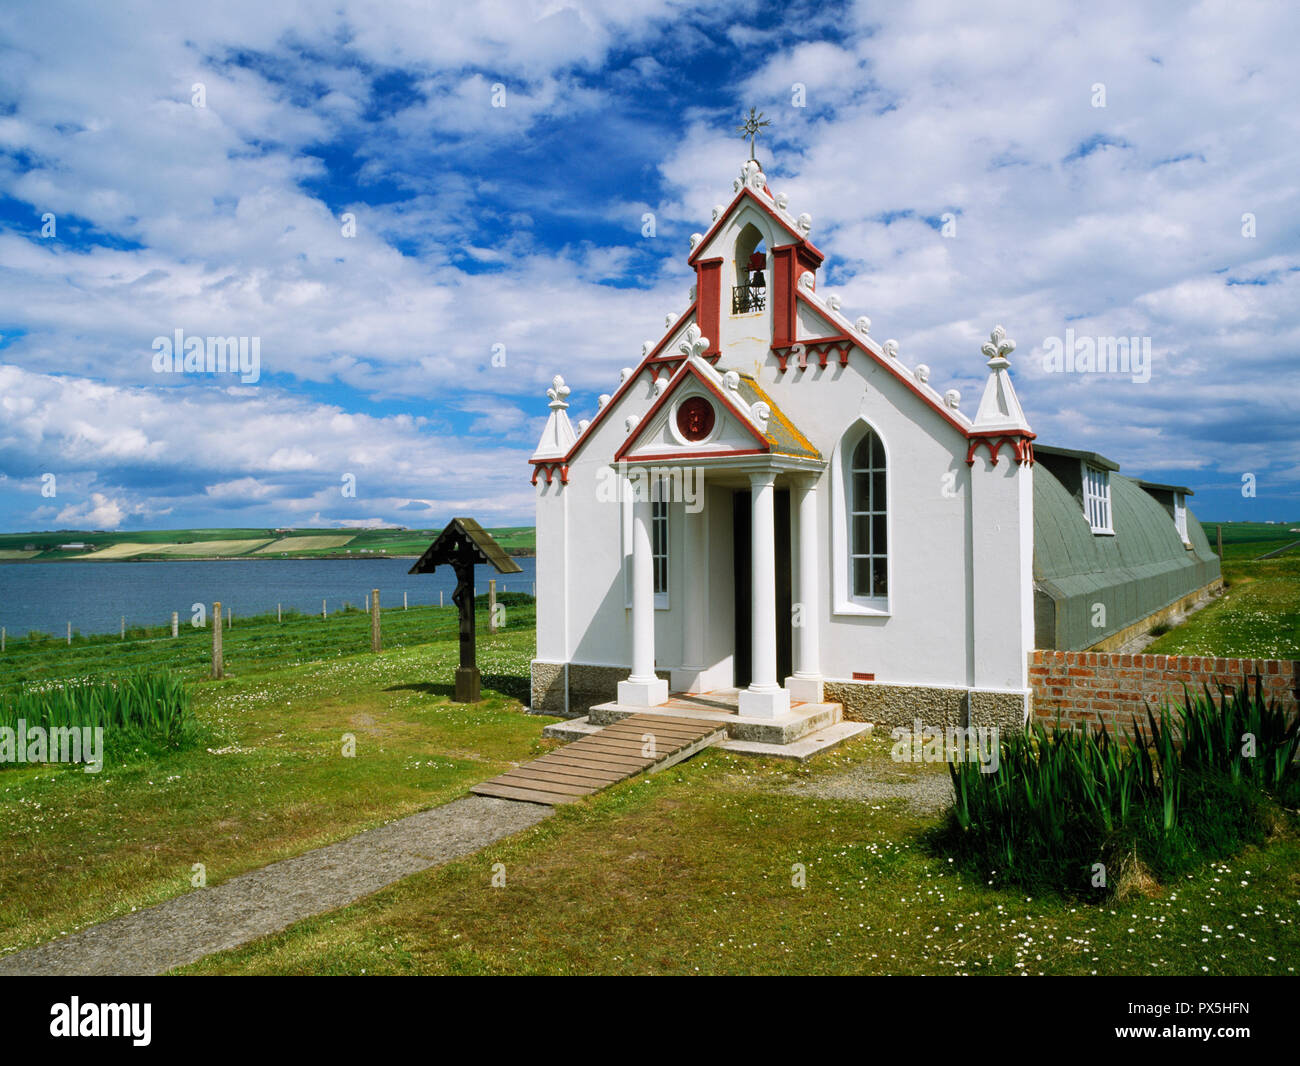 Italian Chapel or Queen of Peace Chapel, Lamb Holm, Orkney, built and decorated by Italian prisoners captured during World War II. Stock Photo